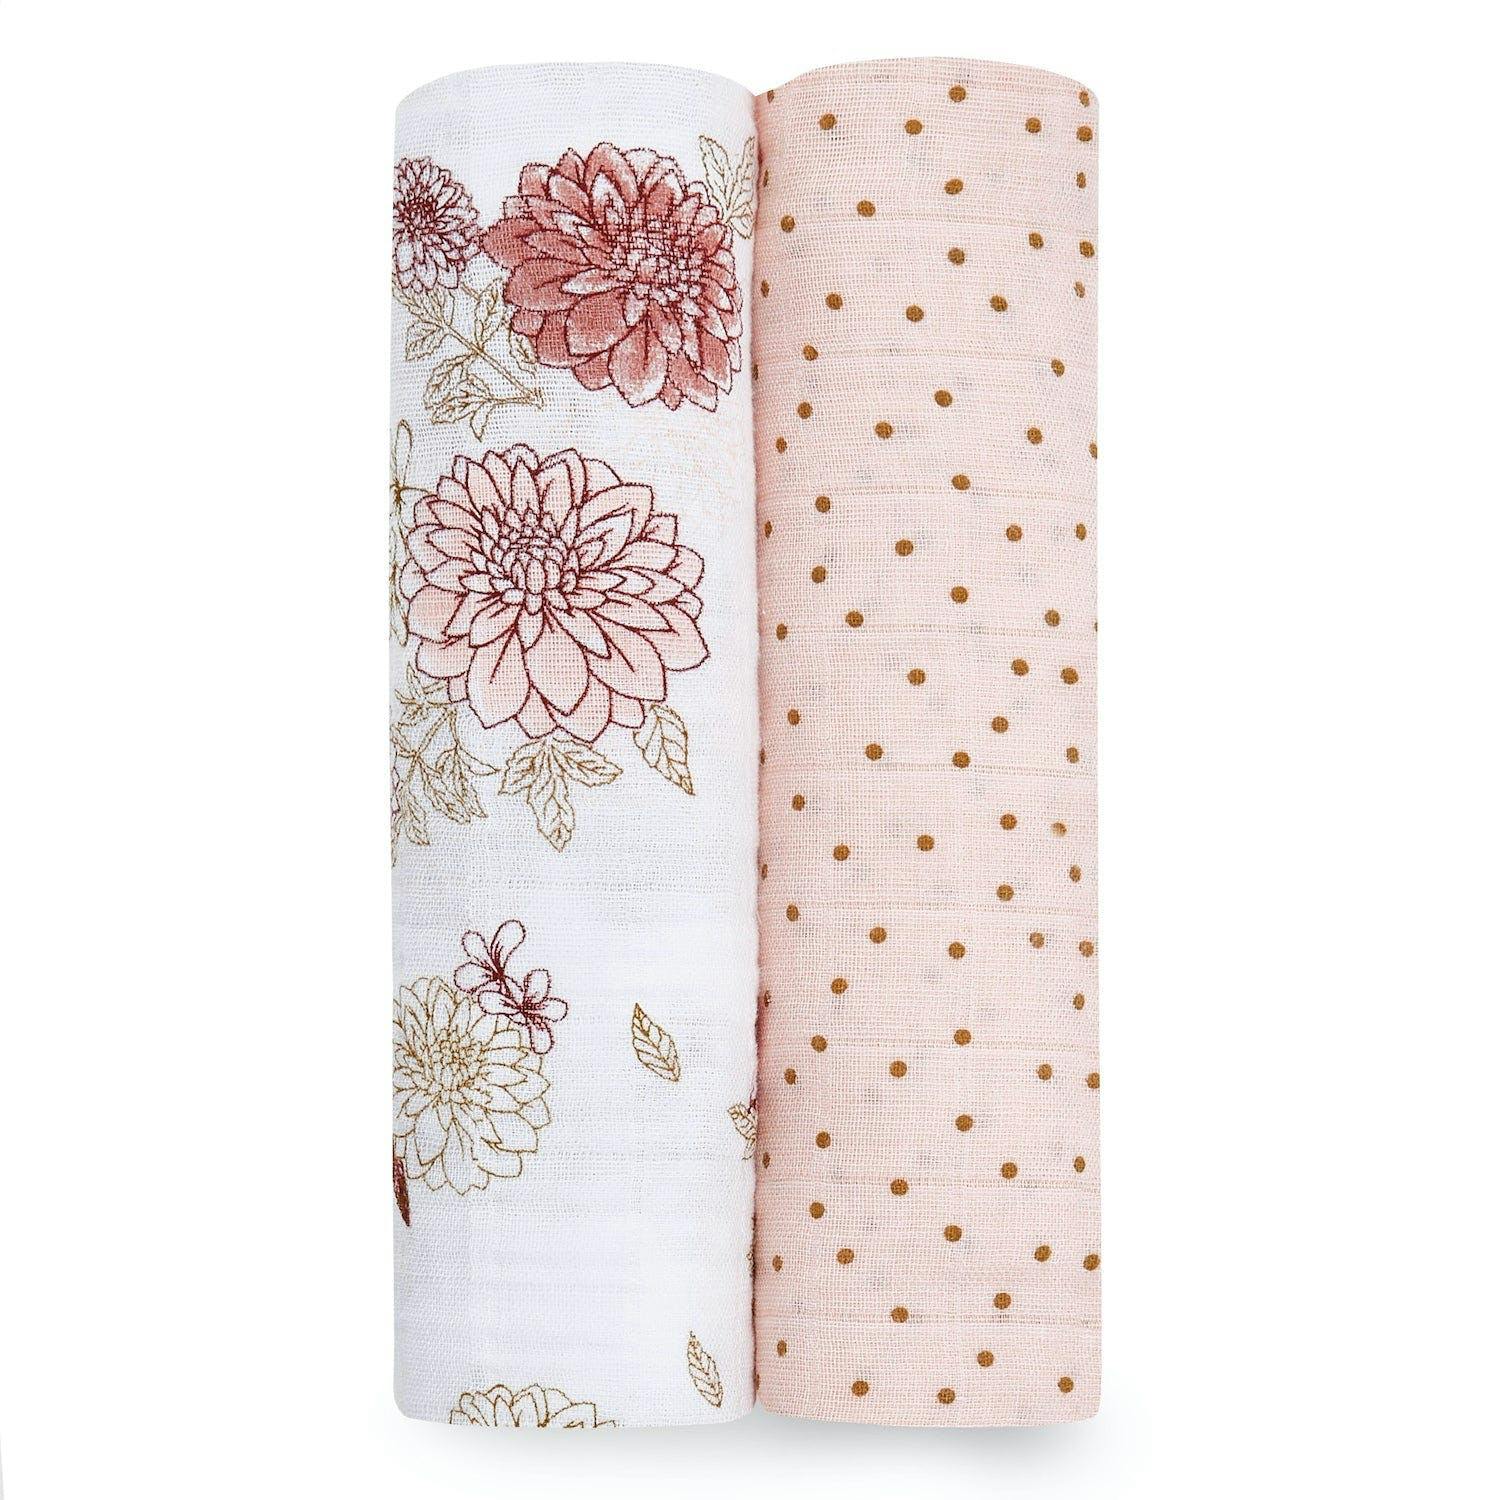 Aden + Anais Classic Muslin Swaddle Wraps 2-Pack